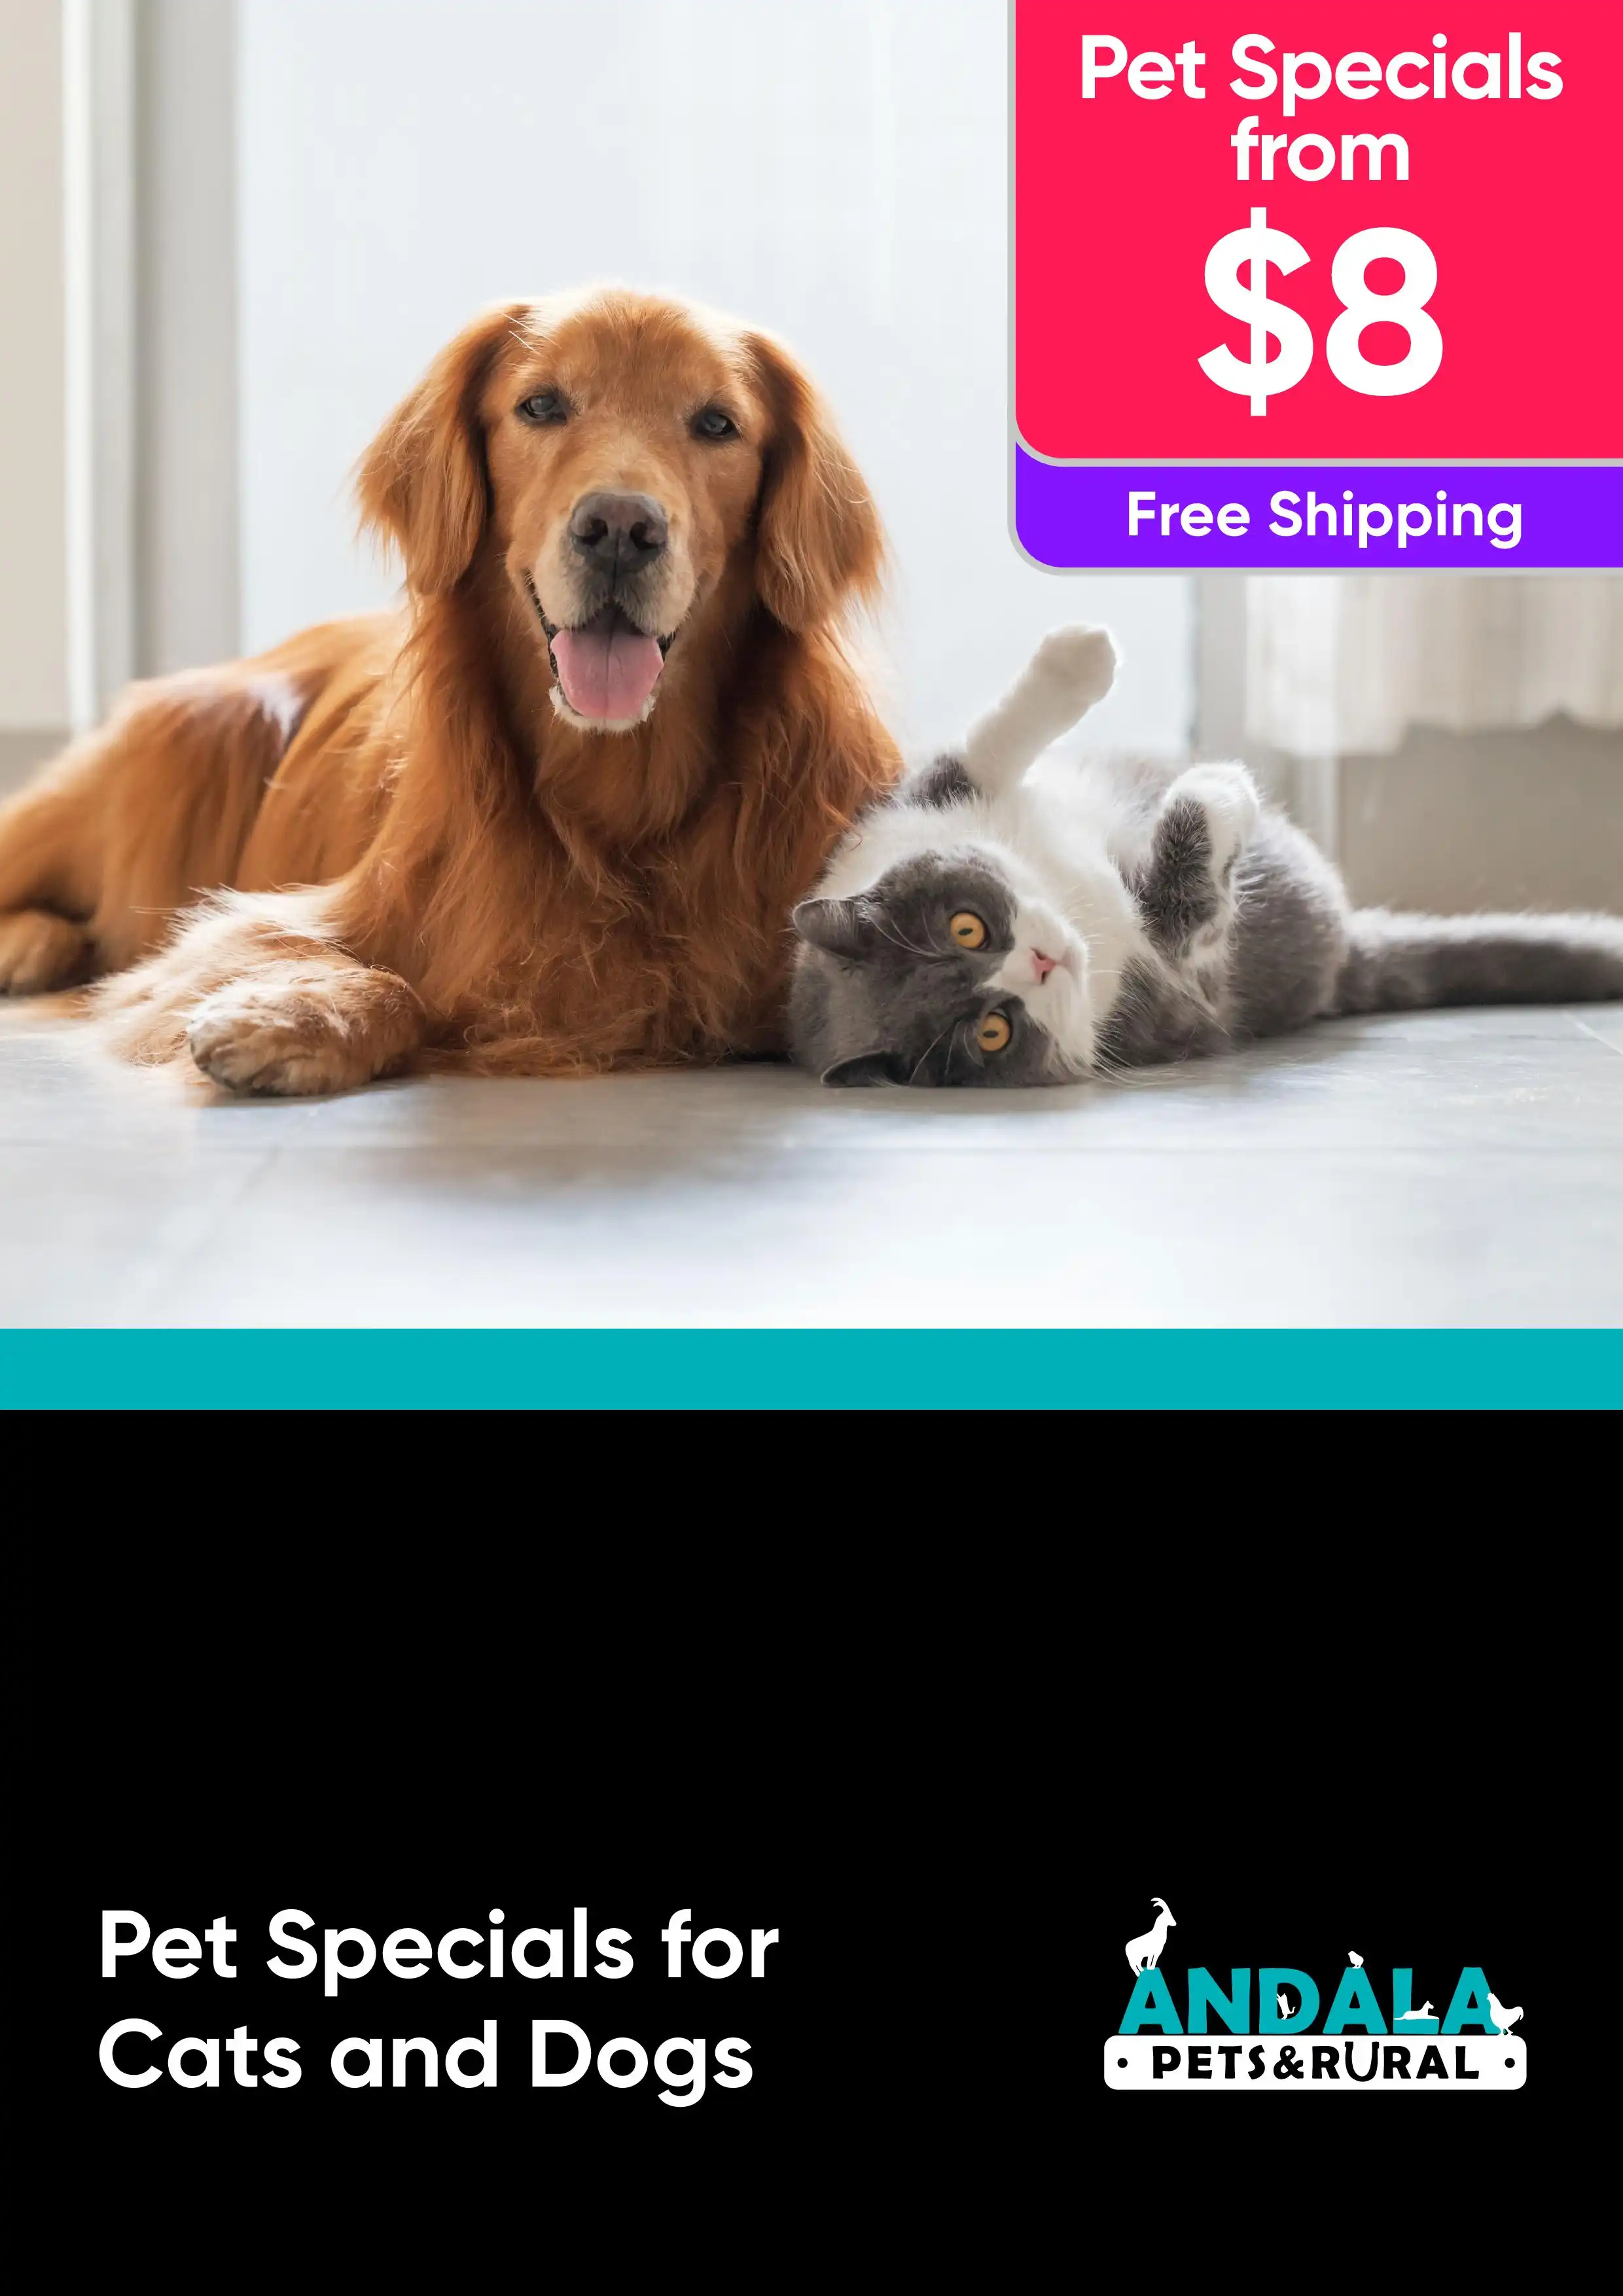 Pet Supply Sale for Cats and Dogs - specials from $8 - Free Shipping